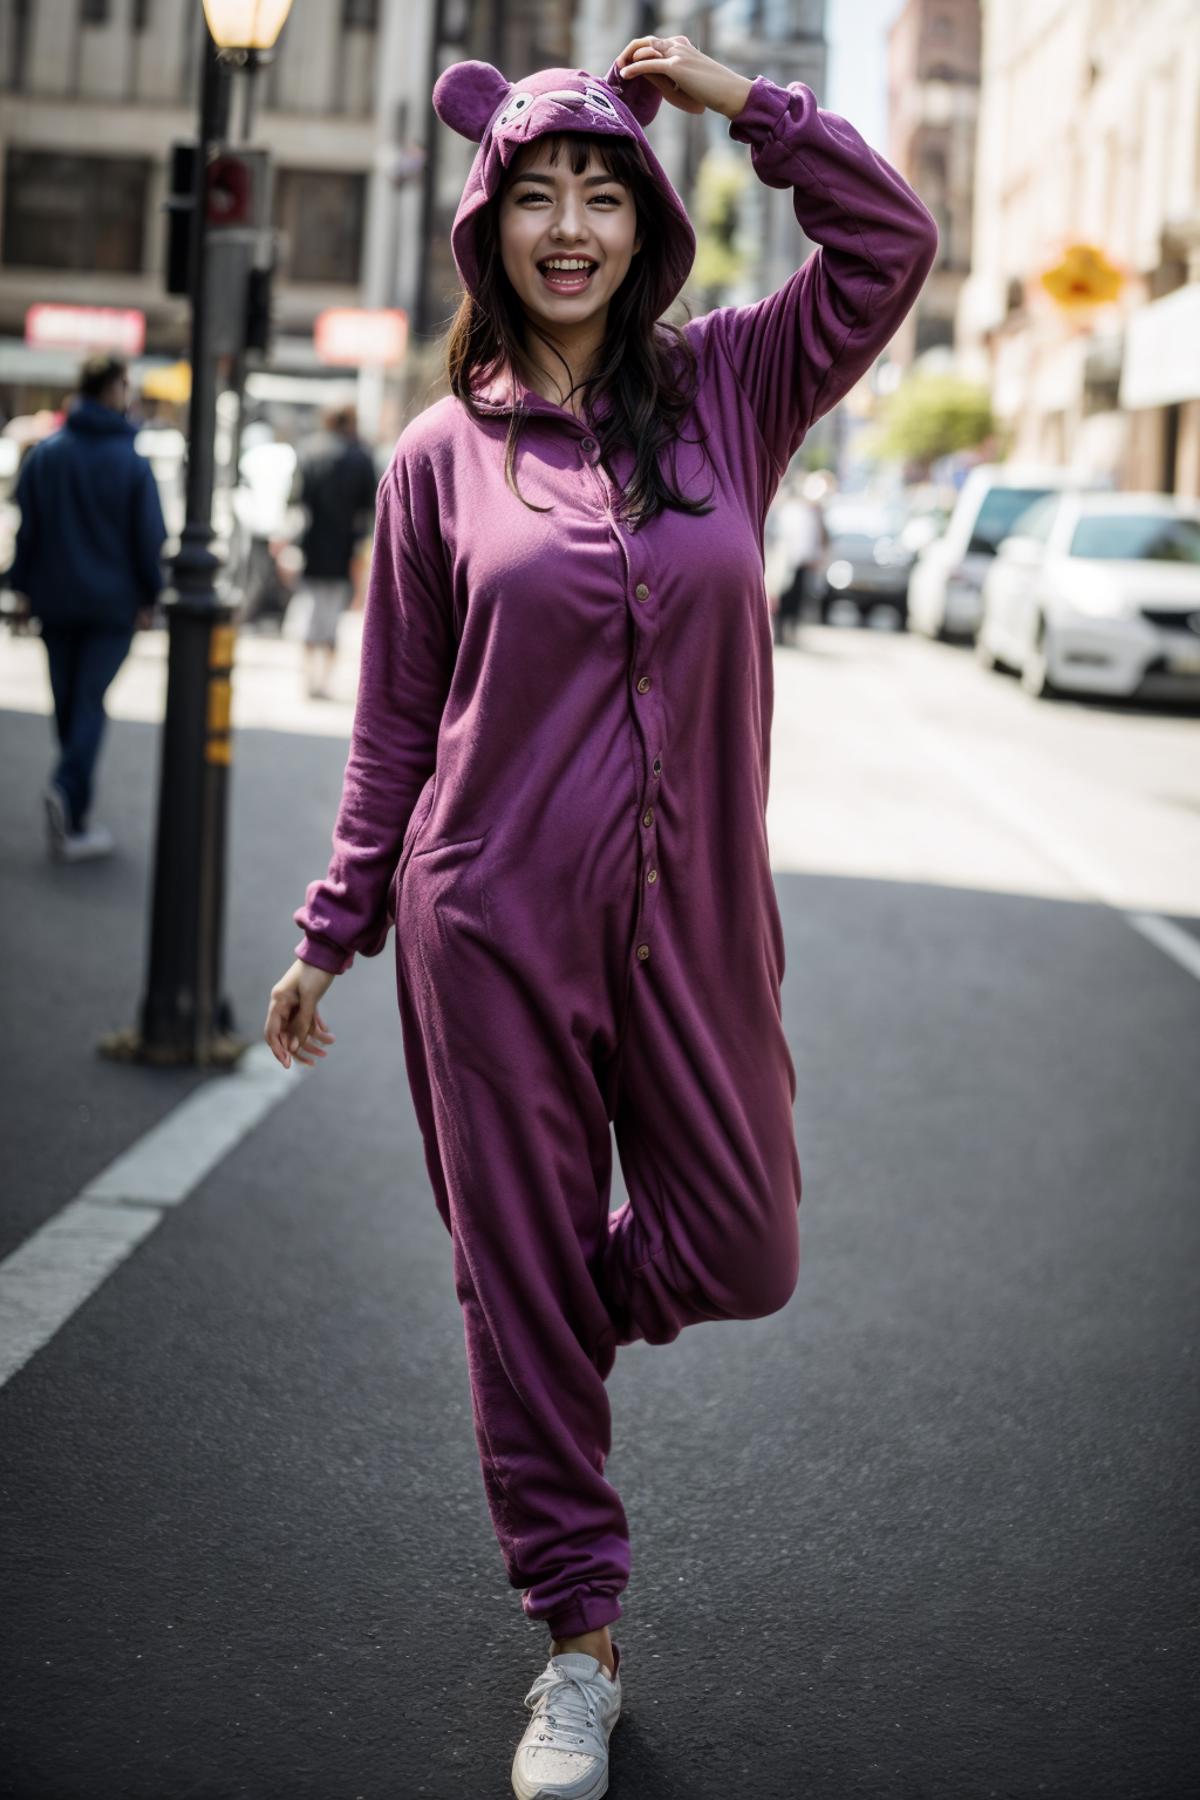 TQ - Cute Onesie | Clothing LoRA image by TracQuoc